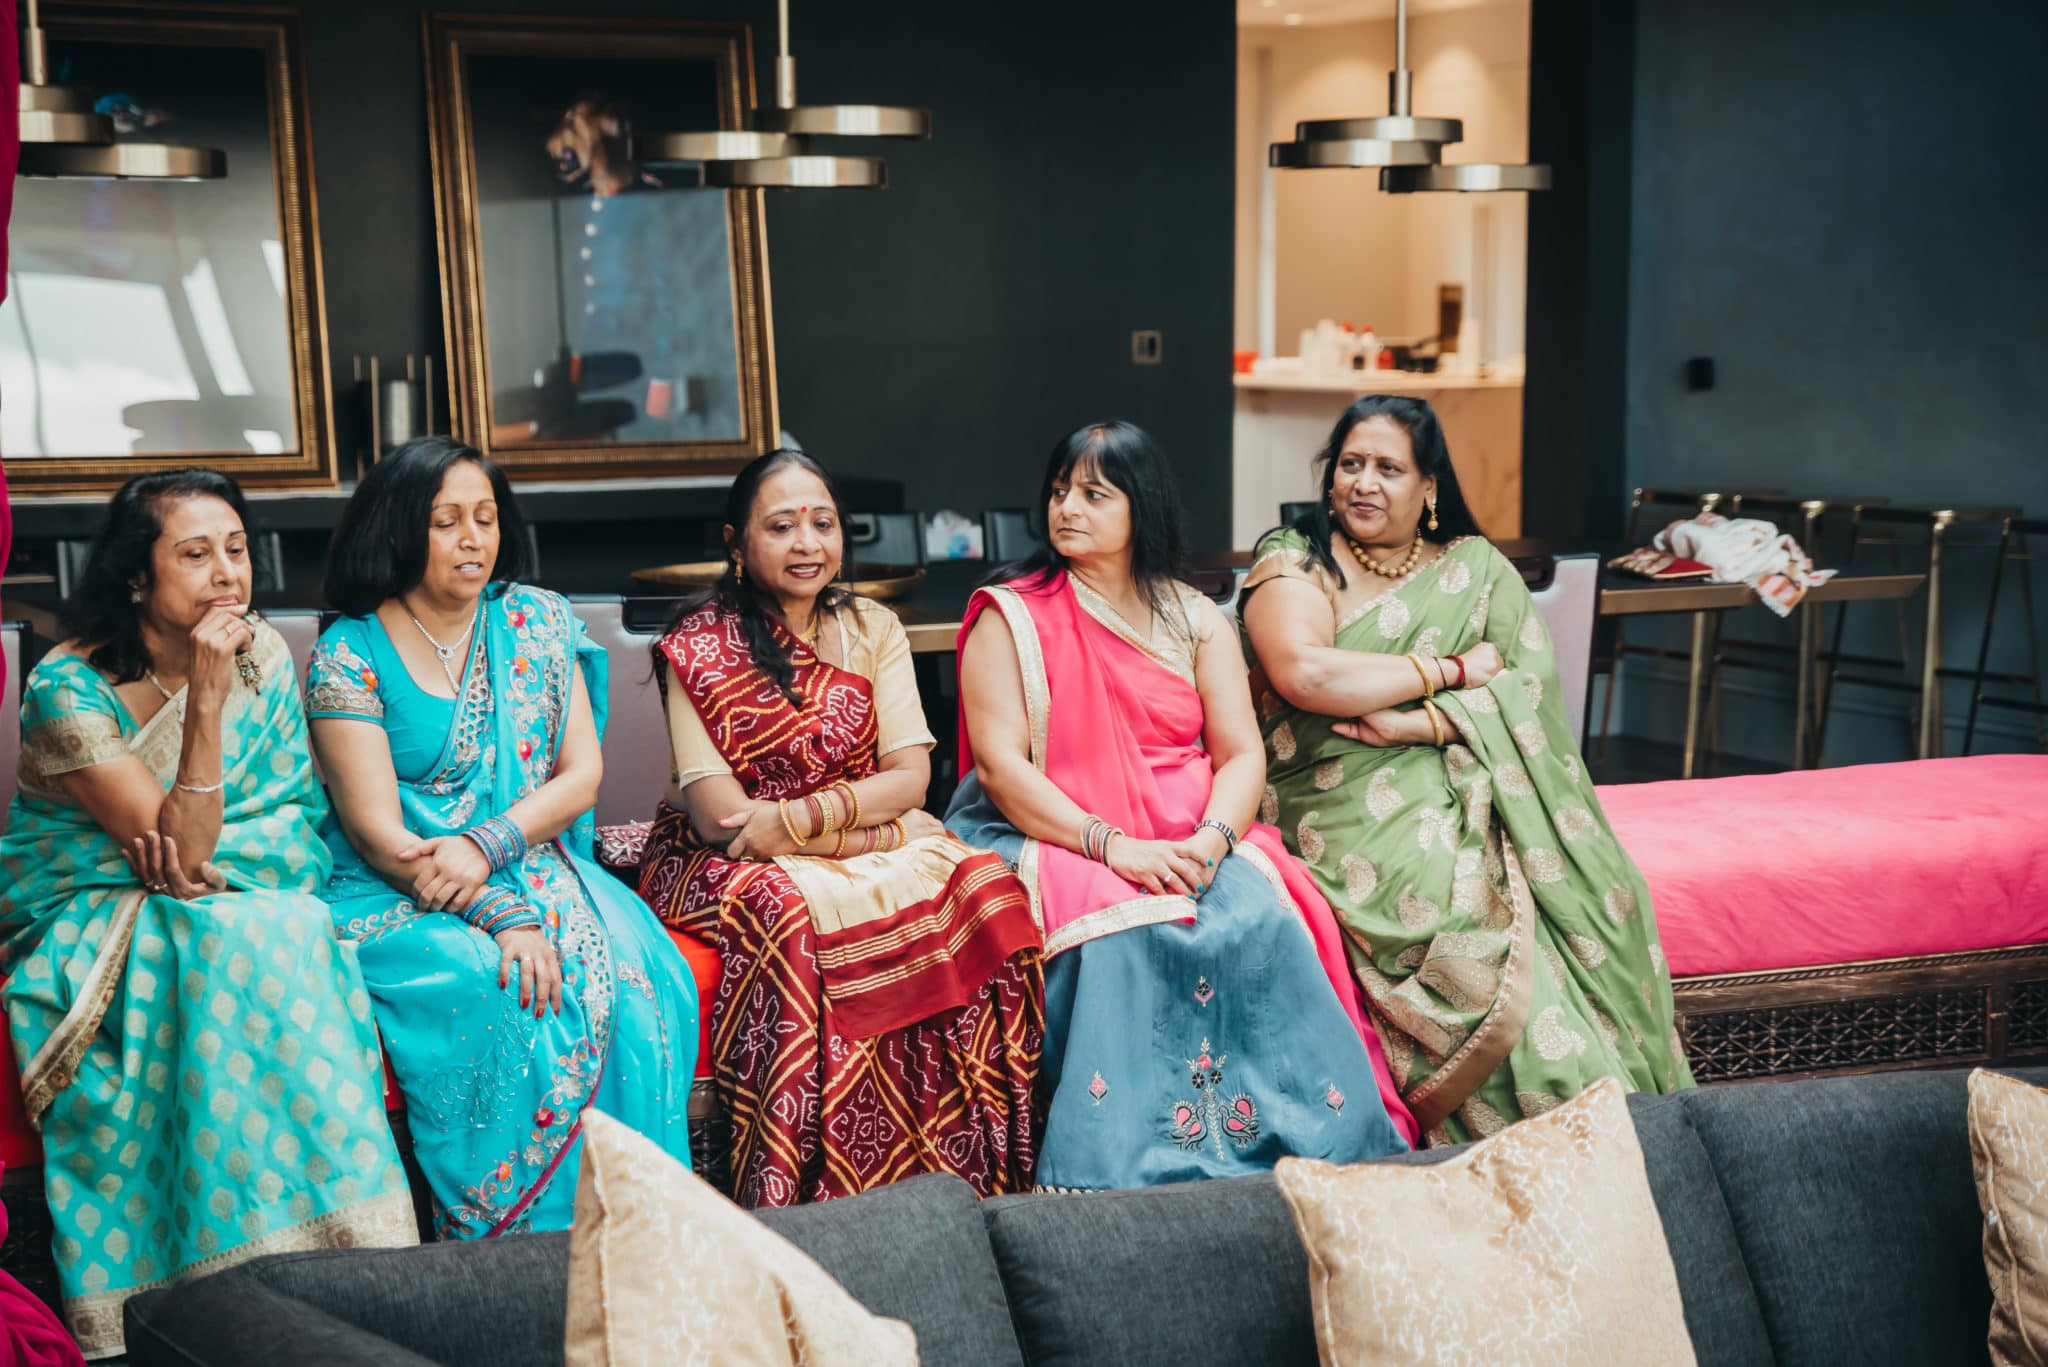 Pre-wedding Vidhi ceremony in an Indian wedding ceremony, Barnet, Potters Bar London